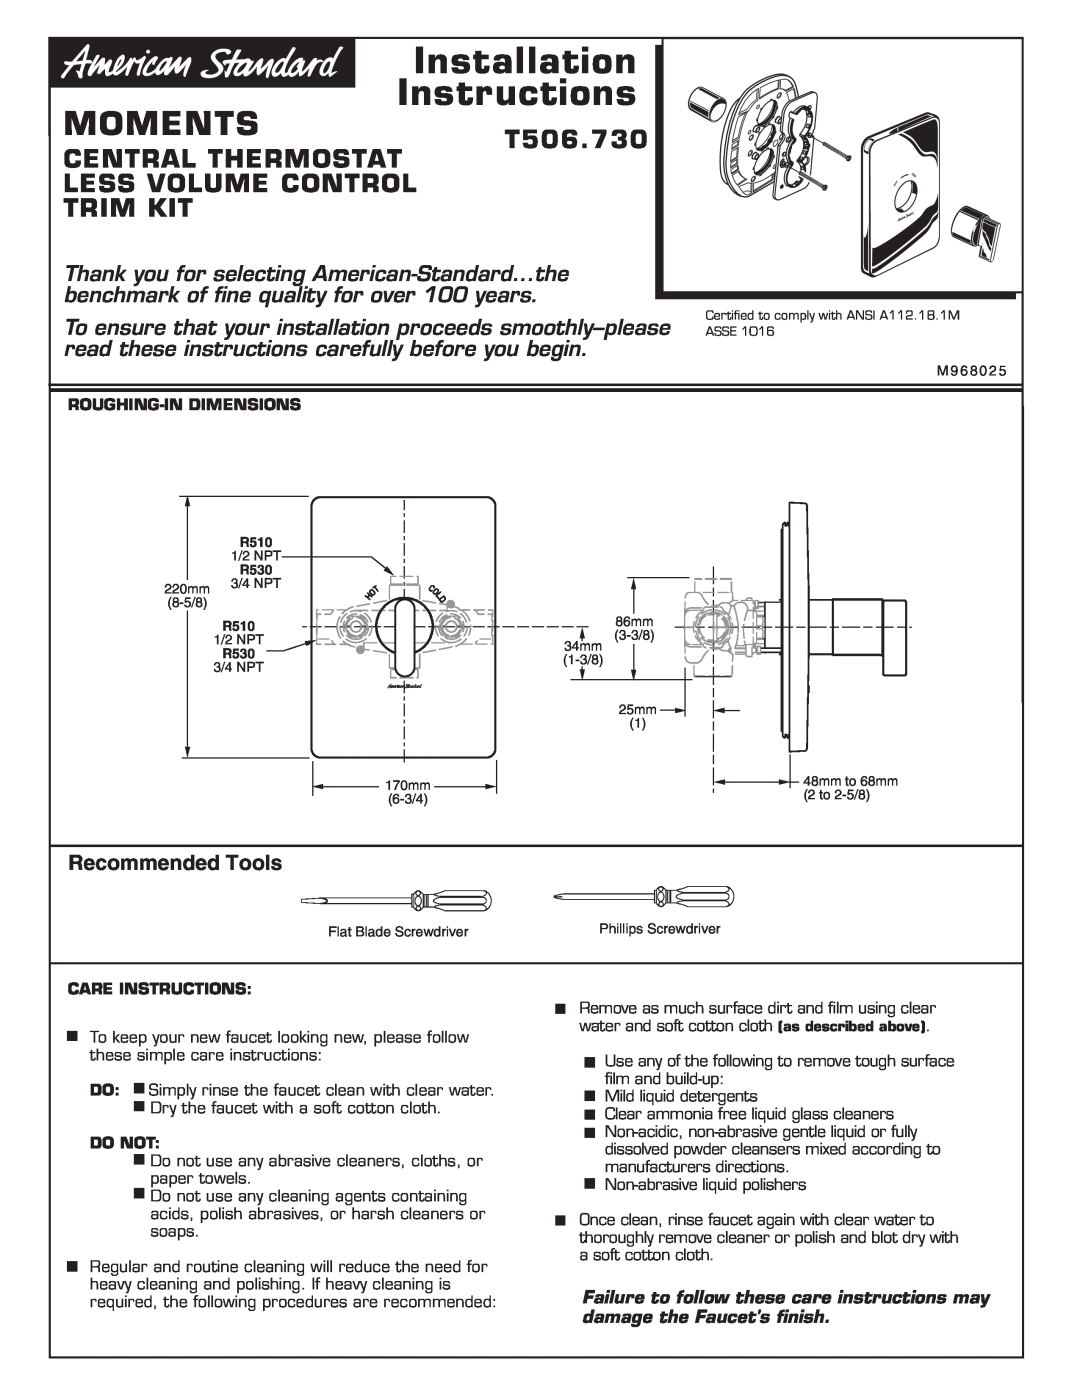 American Standard installation instructions MOMENTST506.730 CENTRAL THERMOSTAT LESS VOLUME CONTROL TRIM KIT 